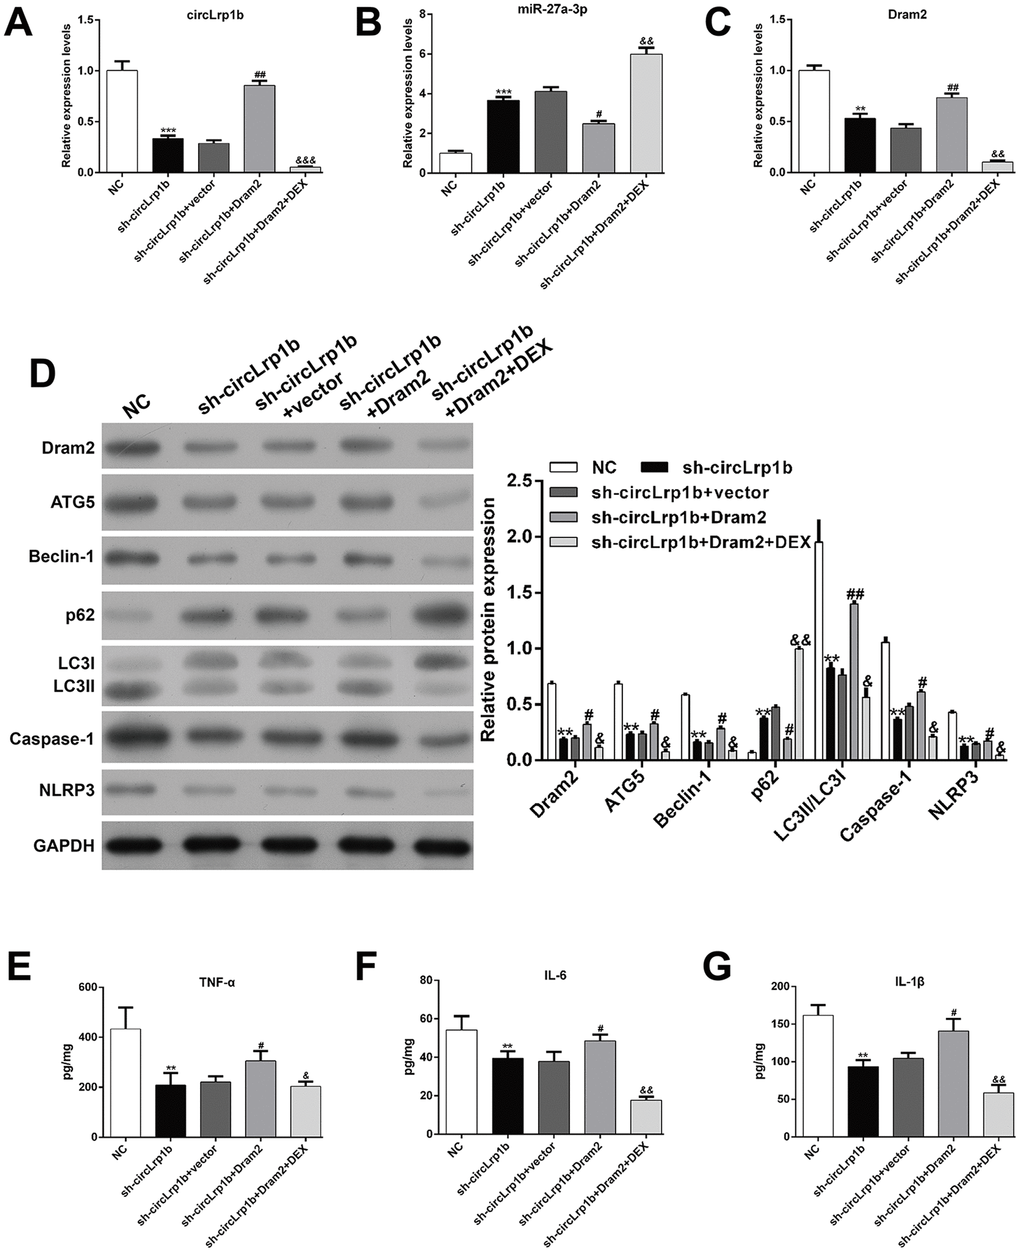 Restoration of Dram2 abolishes the effects of circLrp1b knockdown in traumatic brain injury-induced autophagy and inflammation. Rats were administered intracerebroventricular injection of lentivirus vectors of sh-circLrp1b and Dram2 before traumatic brain injury (TBI) induction, followed by intraperitoneal injection of 20 μg/kg dexmedetomidine (DEX). The expression levels of circLrp1b (A), miR-27a-3p (B), and Dram2 (C), as determined using real-time quantitative reverse transcriptase polymerase chain reaction. (D) The expression levels of Dram2, ATG5, Beclin-1, p62, LC3 I/II, caspase-1, and NLRP3 proteins, as evaluated using western blot. Quantitative analysis of TNF-α (E), IL-6 (F), and IL-1β (G) production in the hippocampal tissues by using enzyme-linked immunosorbent assay (ELISA). Each experiment was repeated 6 times. **p p p p p p p 